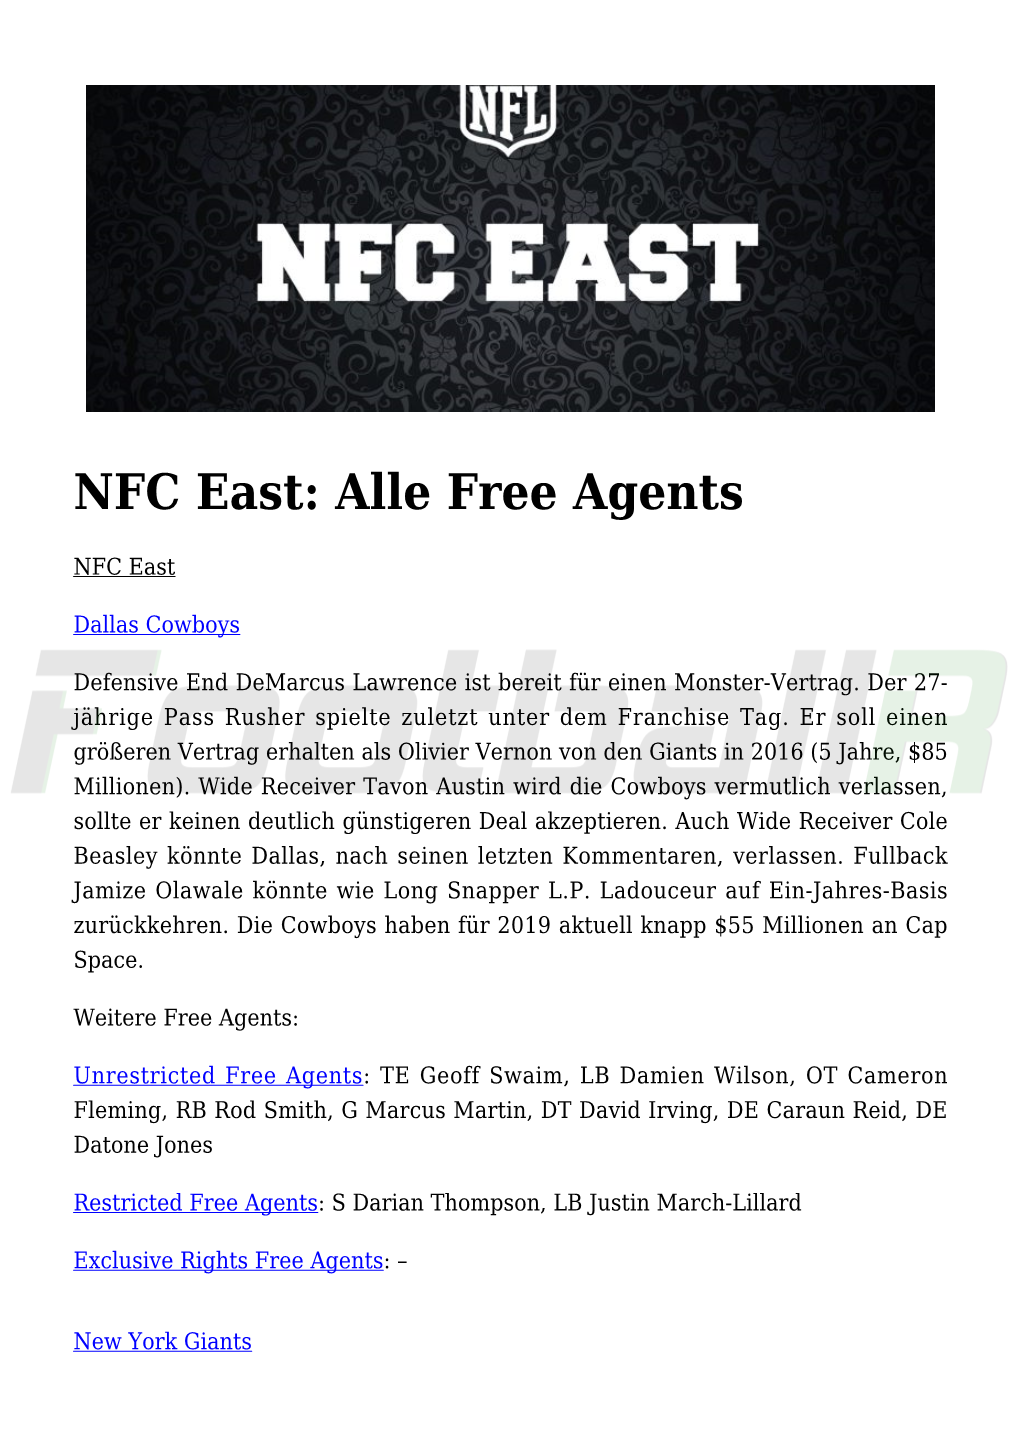 NFC East: Alle Free Agents